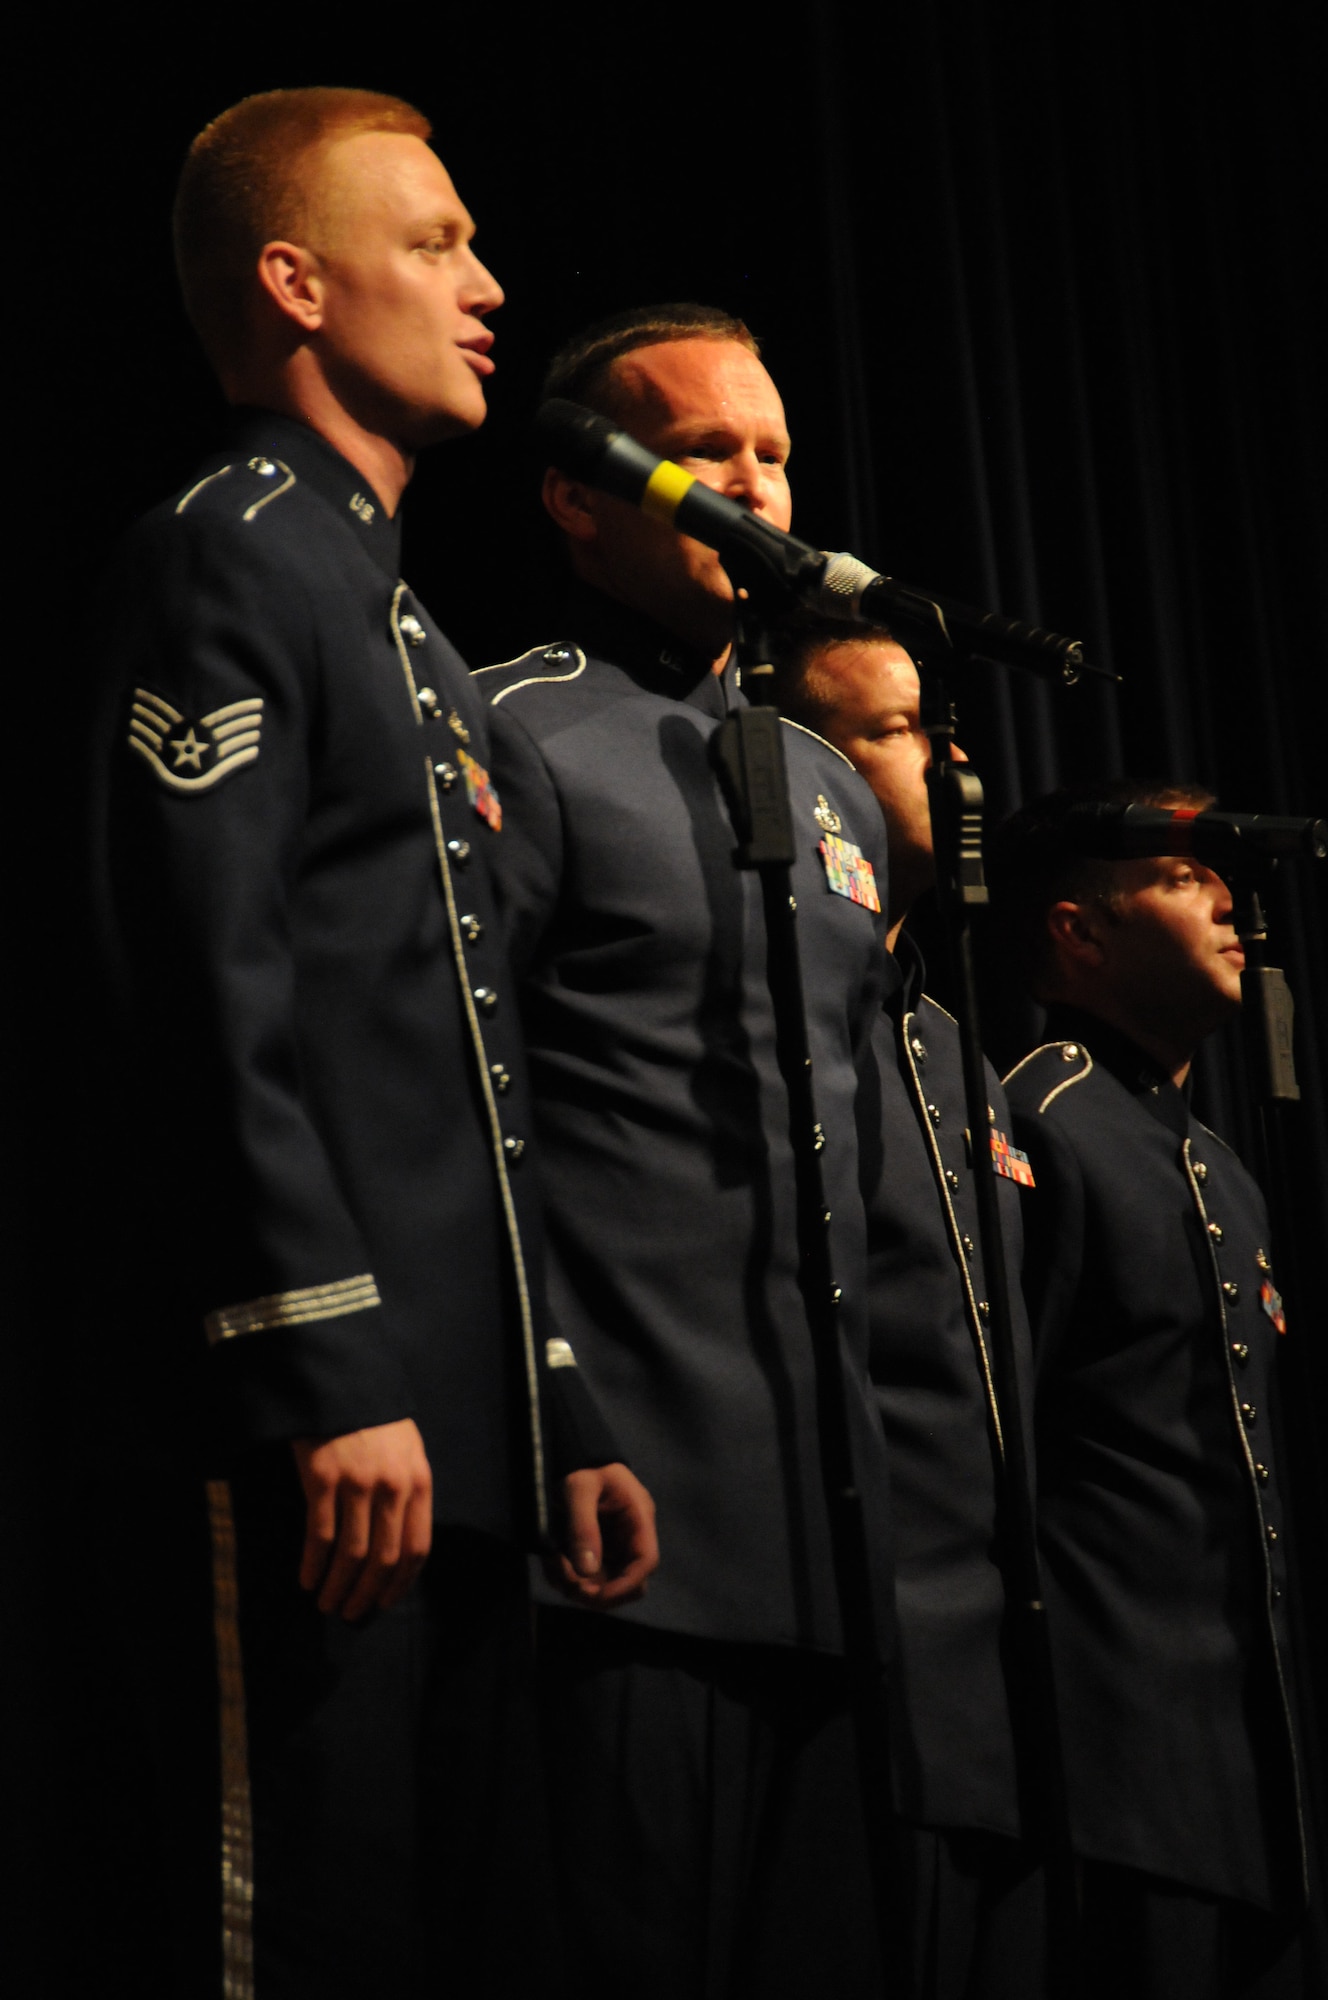 The 555th Air Force Band, also known as the Triple Nickel and Air National Band of the Great Lakes, performs their last concert at Anthony Wayne High School in Whitehouse, Ohio, July 7, 2012.  The Triple Nickel band was deactivated after 90 years of service as part of the Ohio Air National Guard.  (U.S. Air Force photo by Senior Airman Amber Williams/Released)